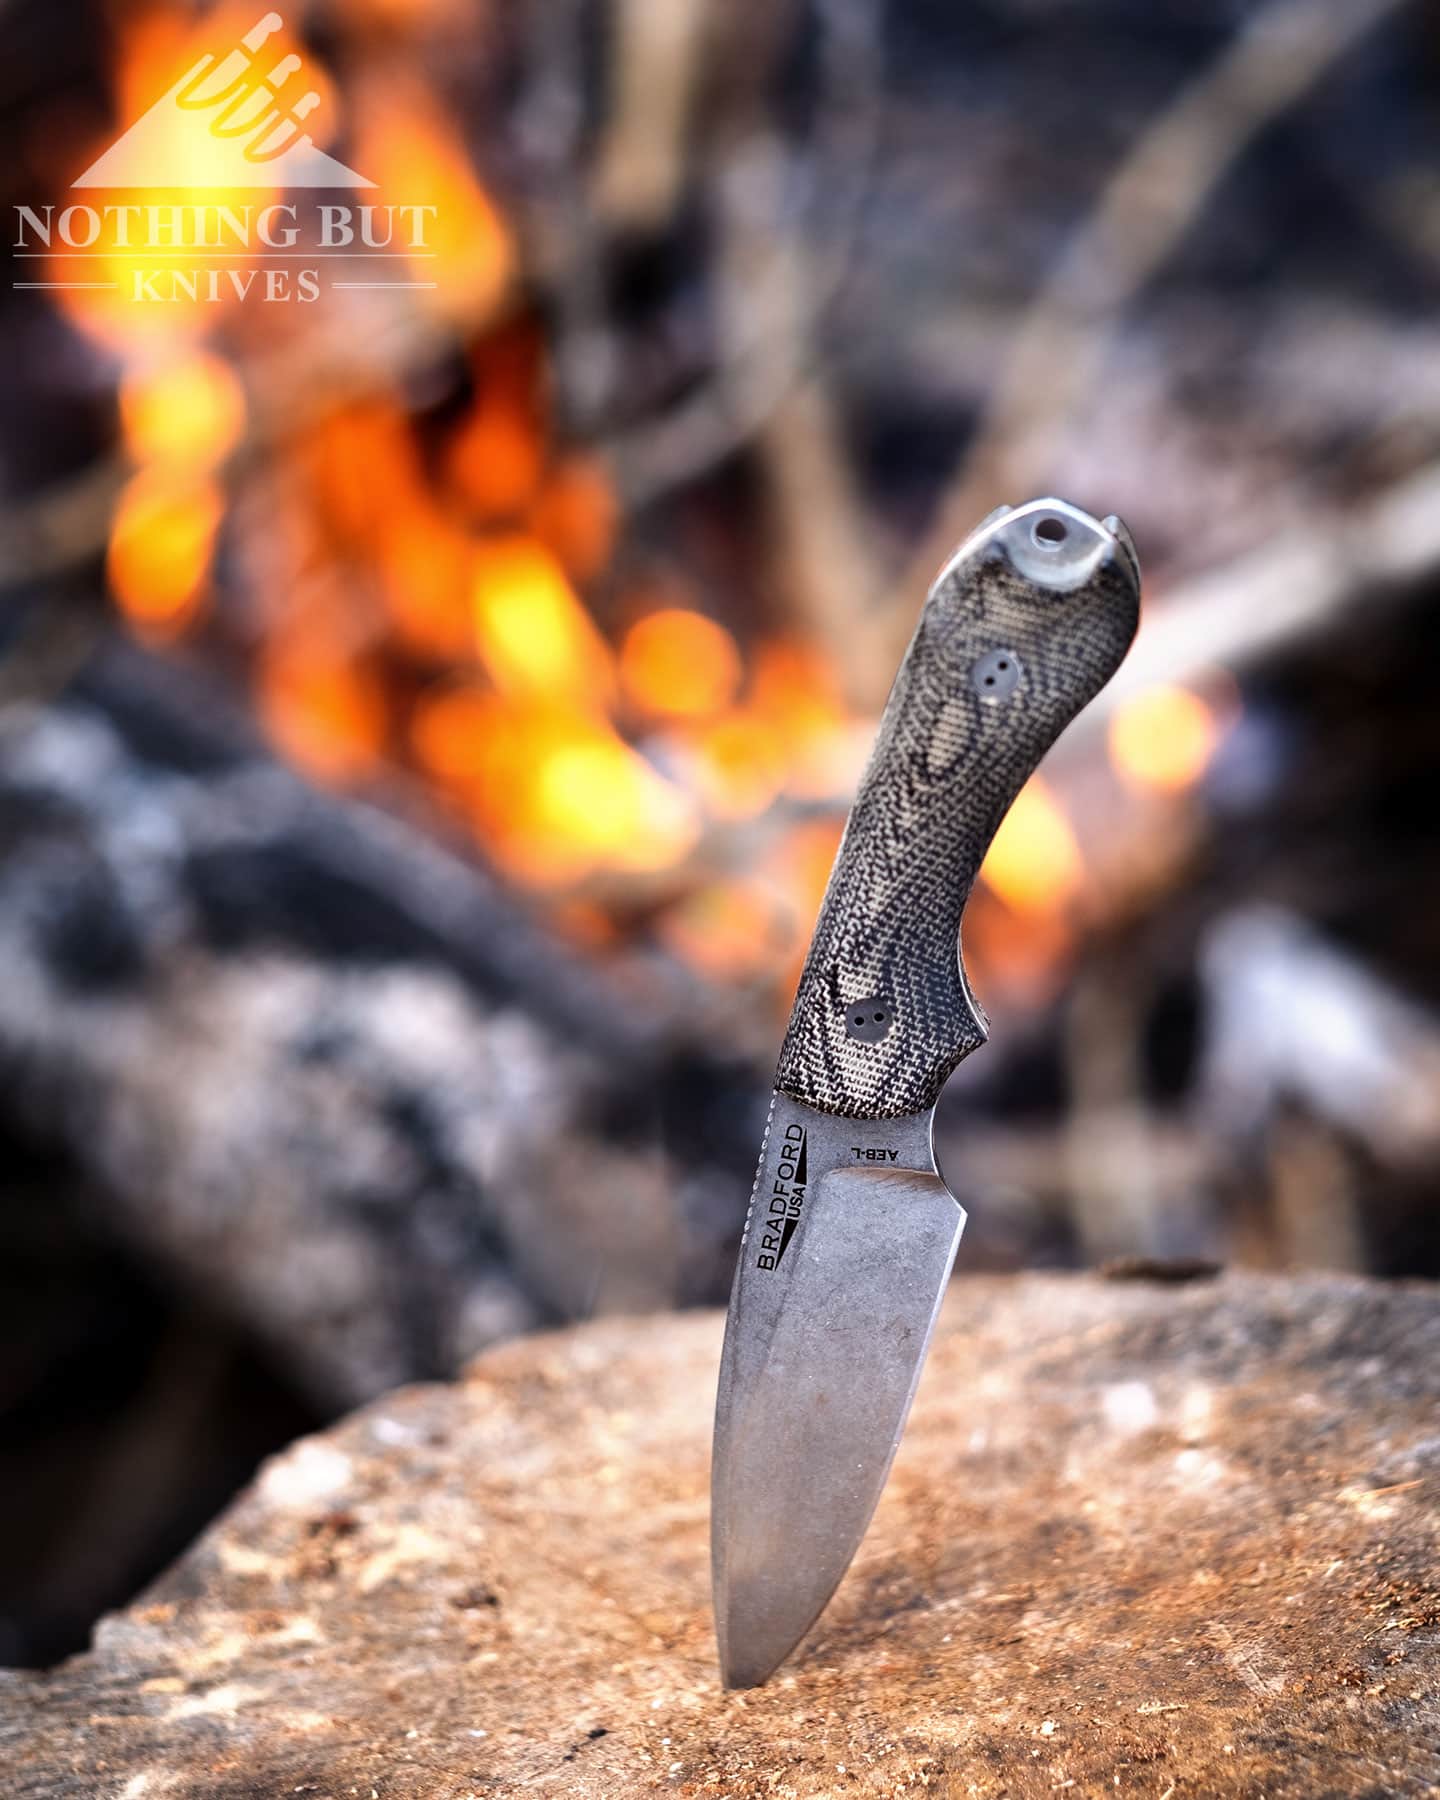 The Bradford Guardian 3 compact fixed blade knife sticking out of a log in front of a campfire.